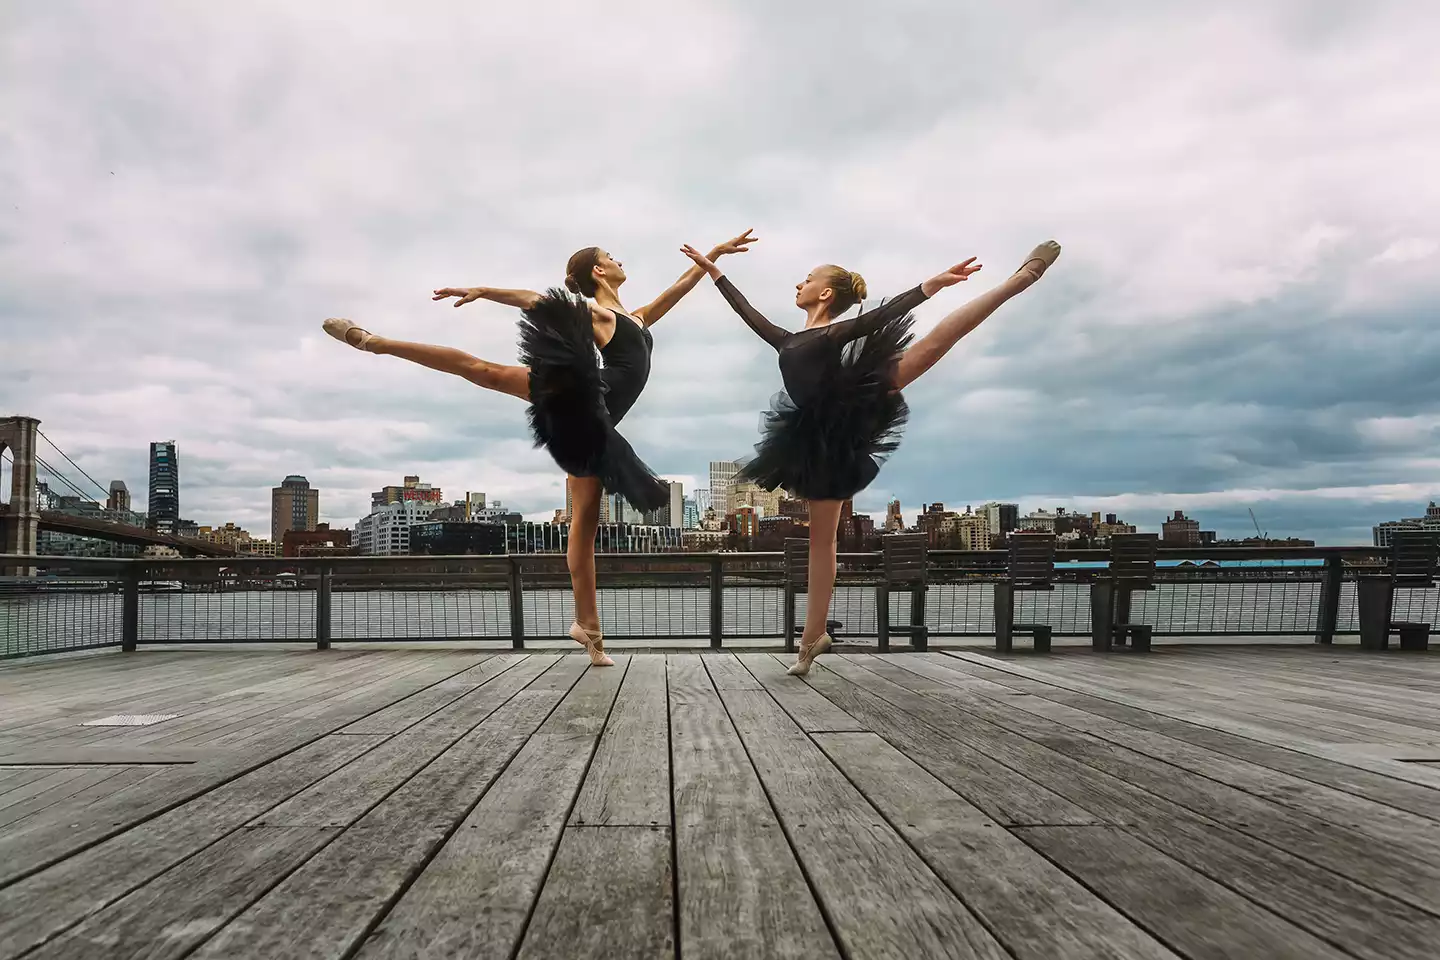 These two DDF ballerinas made Pier 17 their stage, dancing together just below the Brooklyn Bridge!